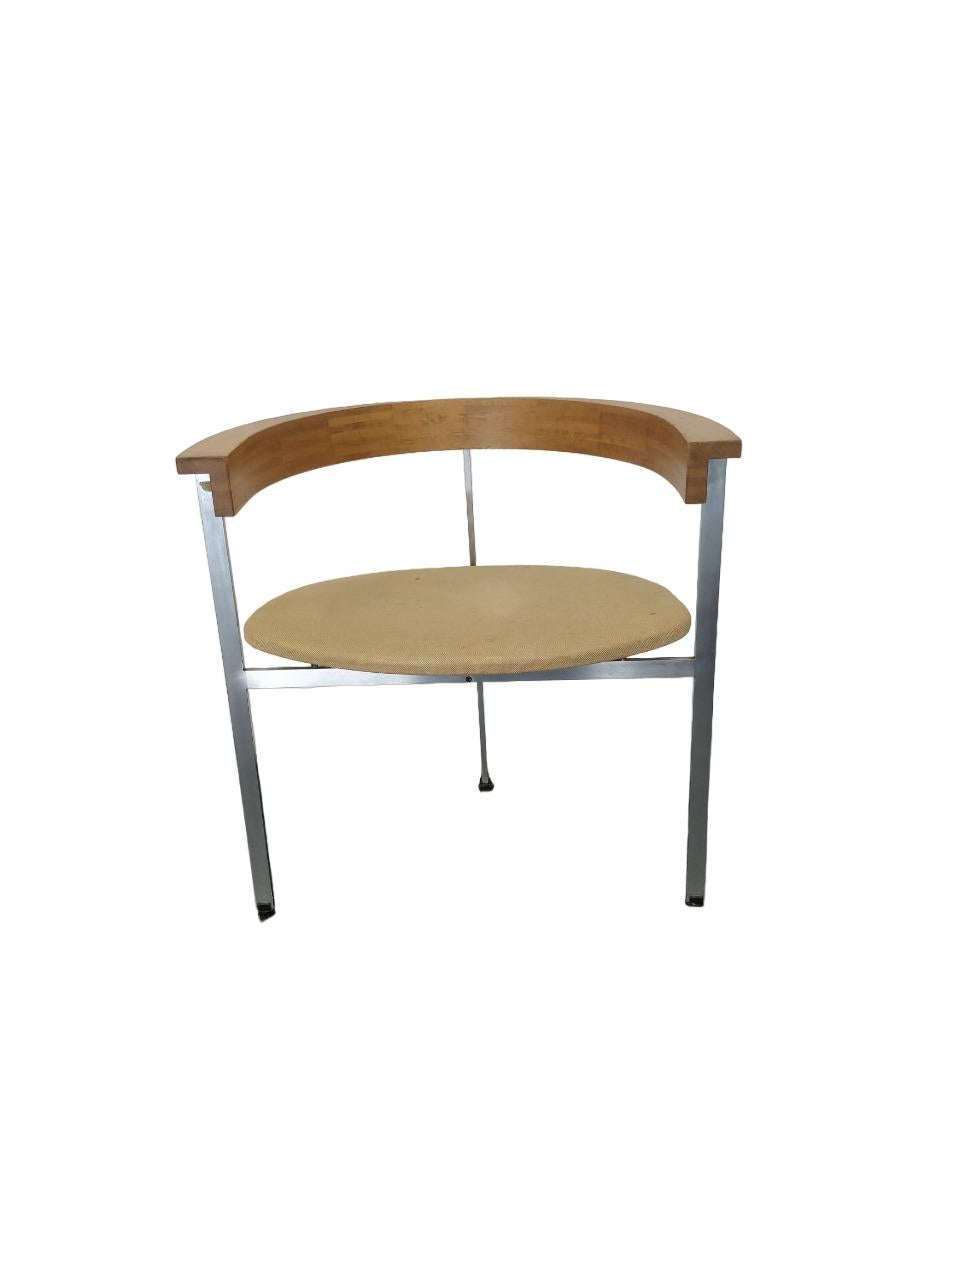 Mid-20th Century Chair designed by Poul Kjaerholm manufactured by da E. Kold Christensen For Sale